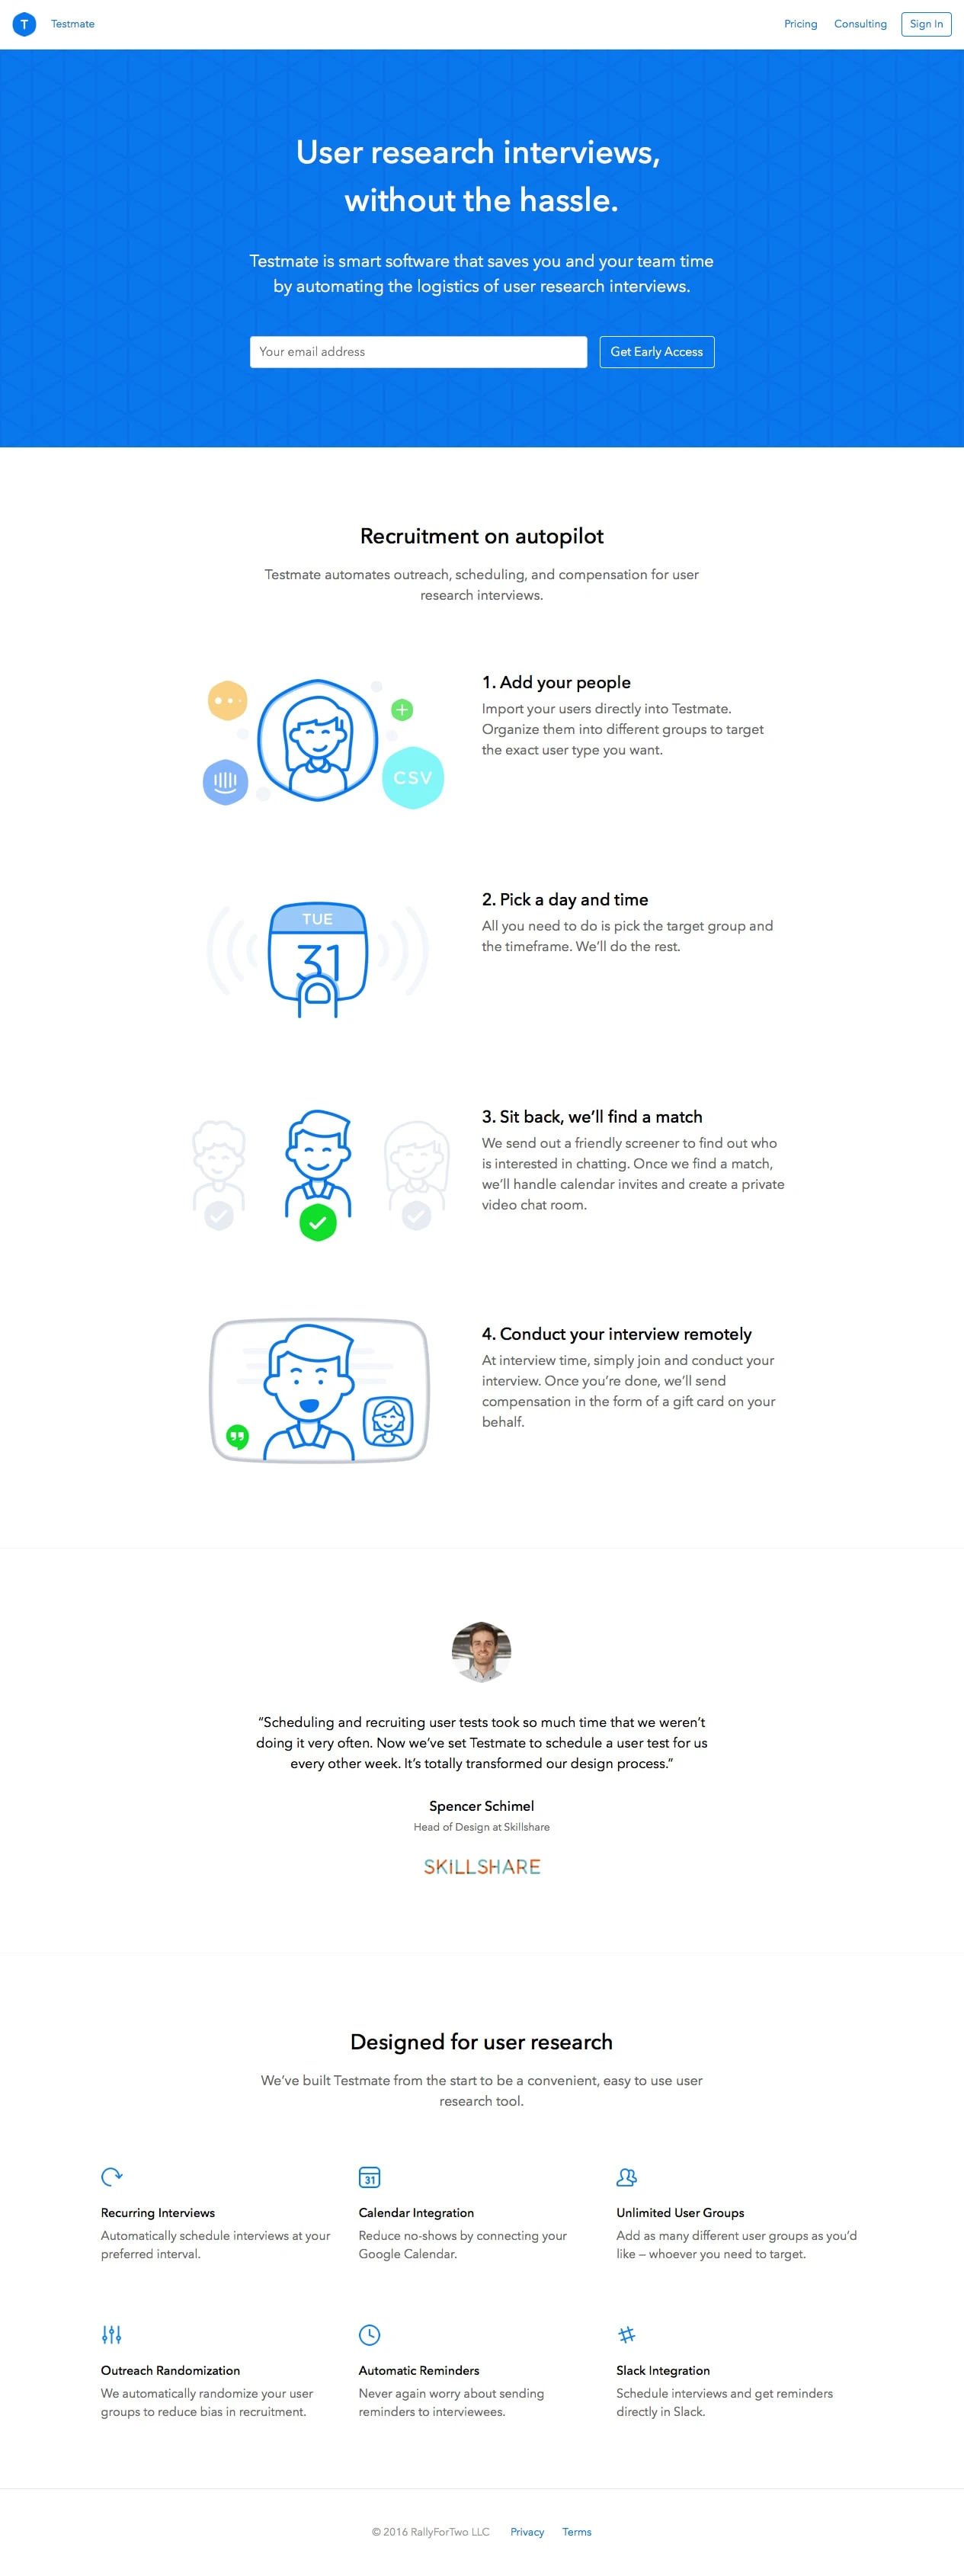 Testmate Landing Page Example: Testmate is smart software that saves you and your team time by automating the logistics of user research interviews. Get Early Access